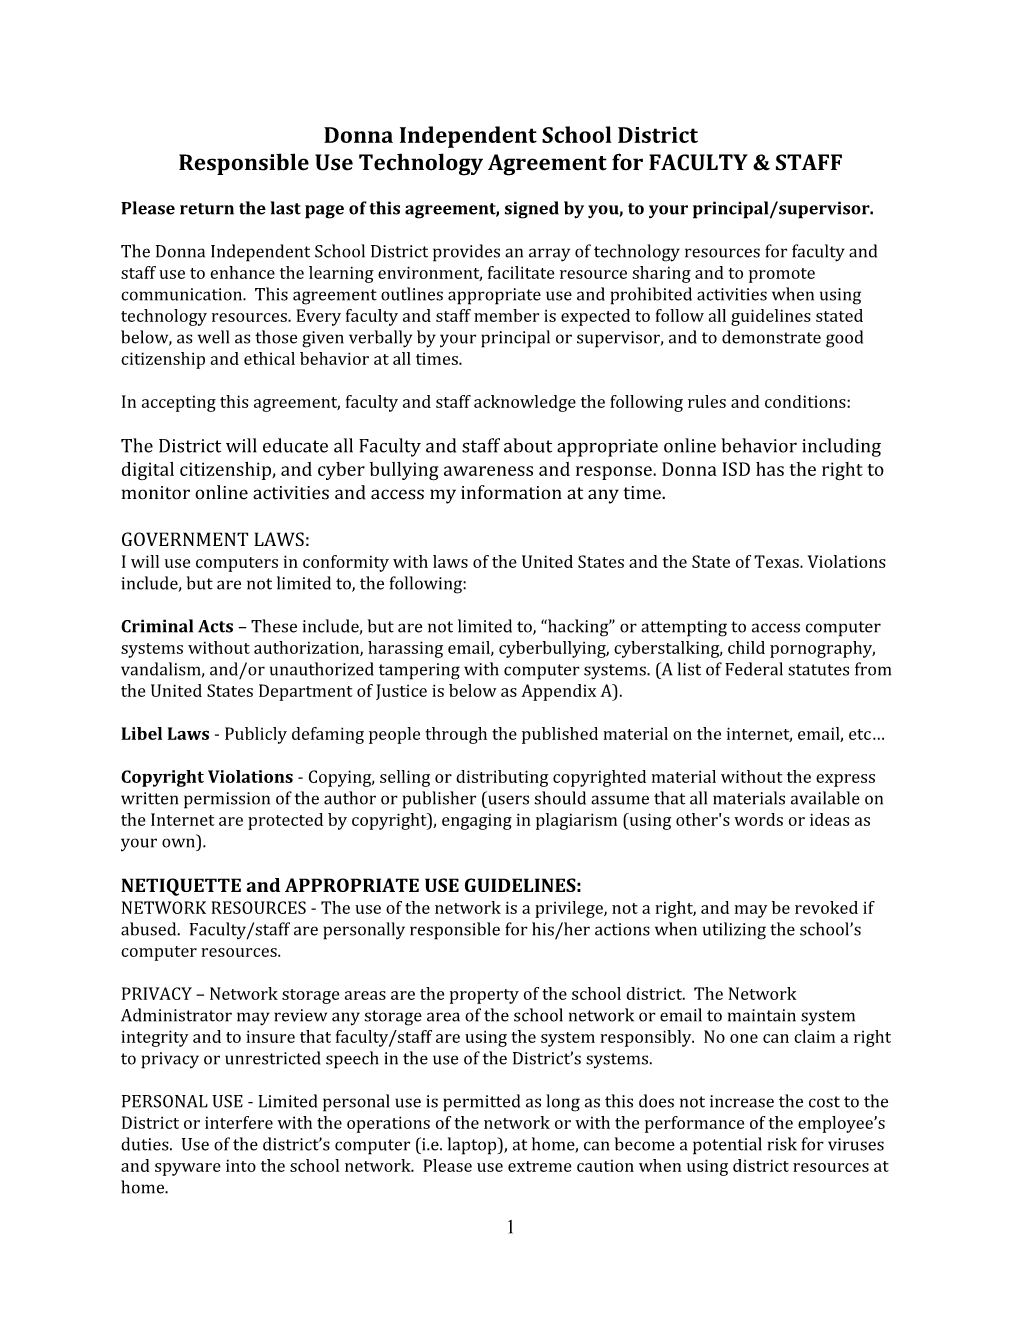 Responsible Use Technology Agreement for FACULTY & STAFF